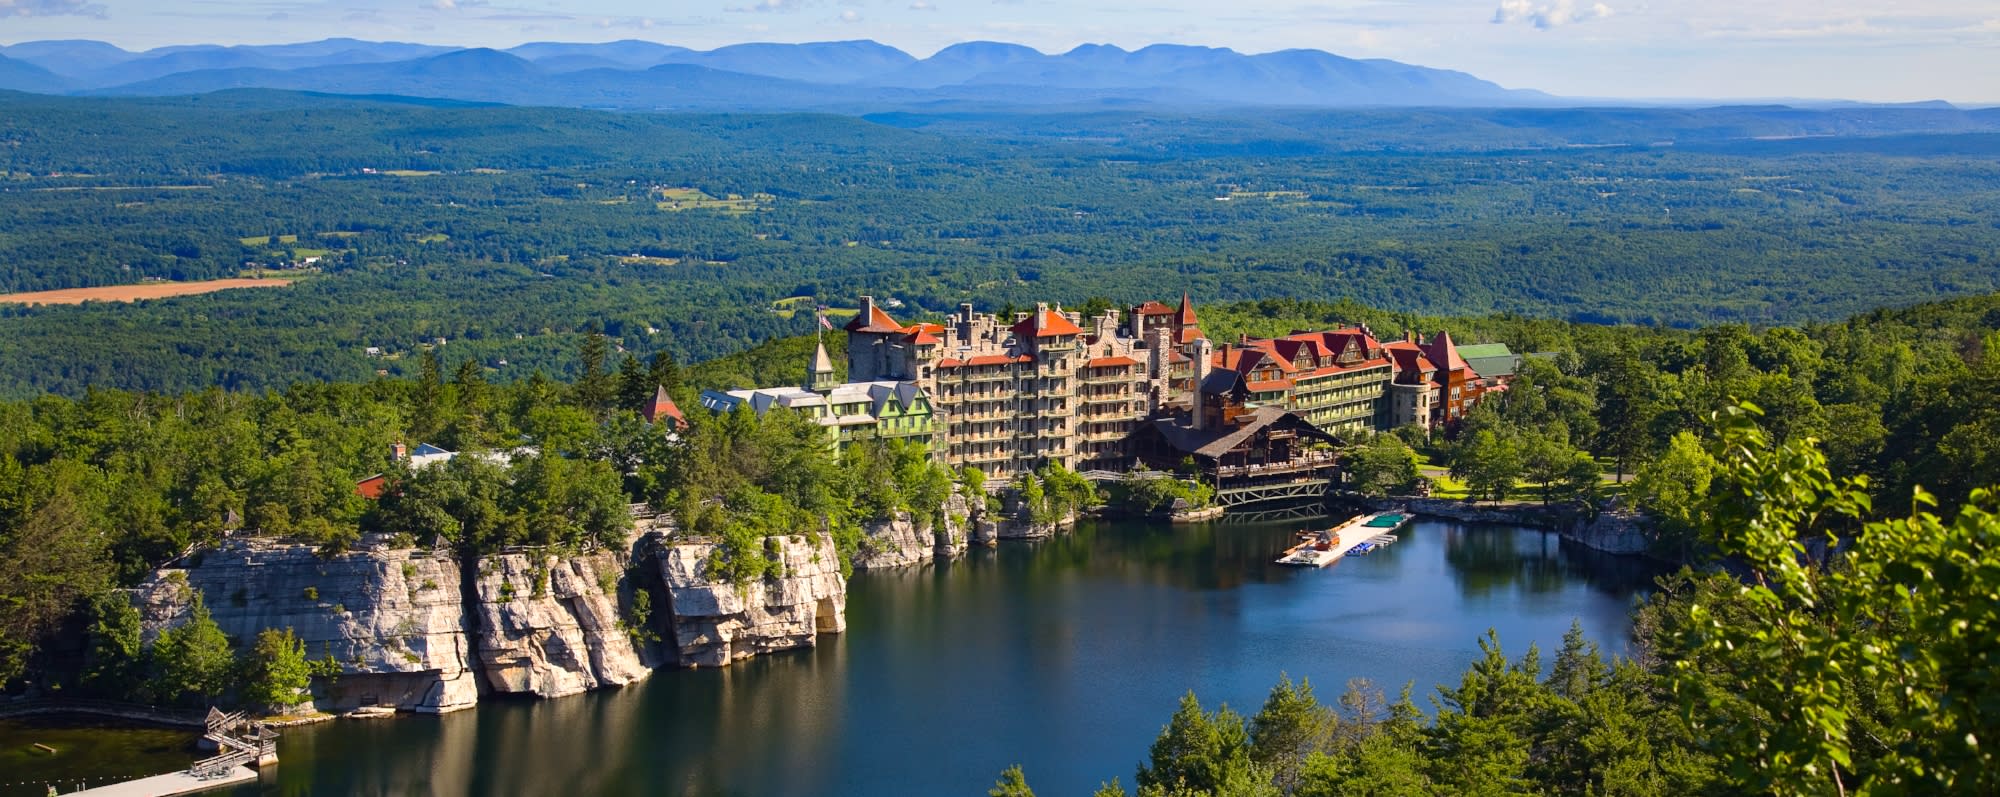 Mohonk Mountain House in Summer - Jim Smith Photography